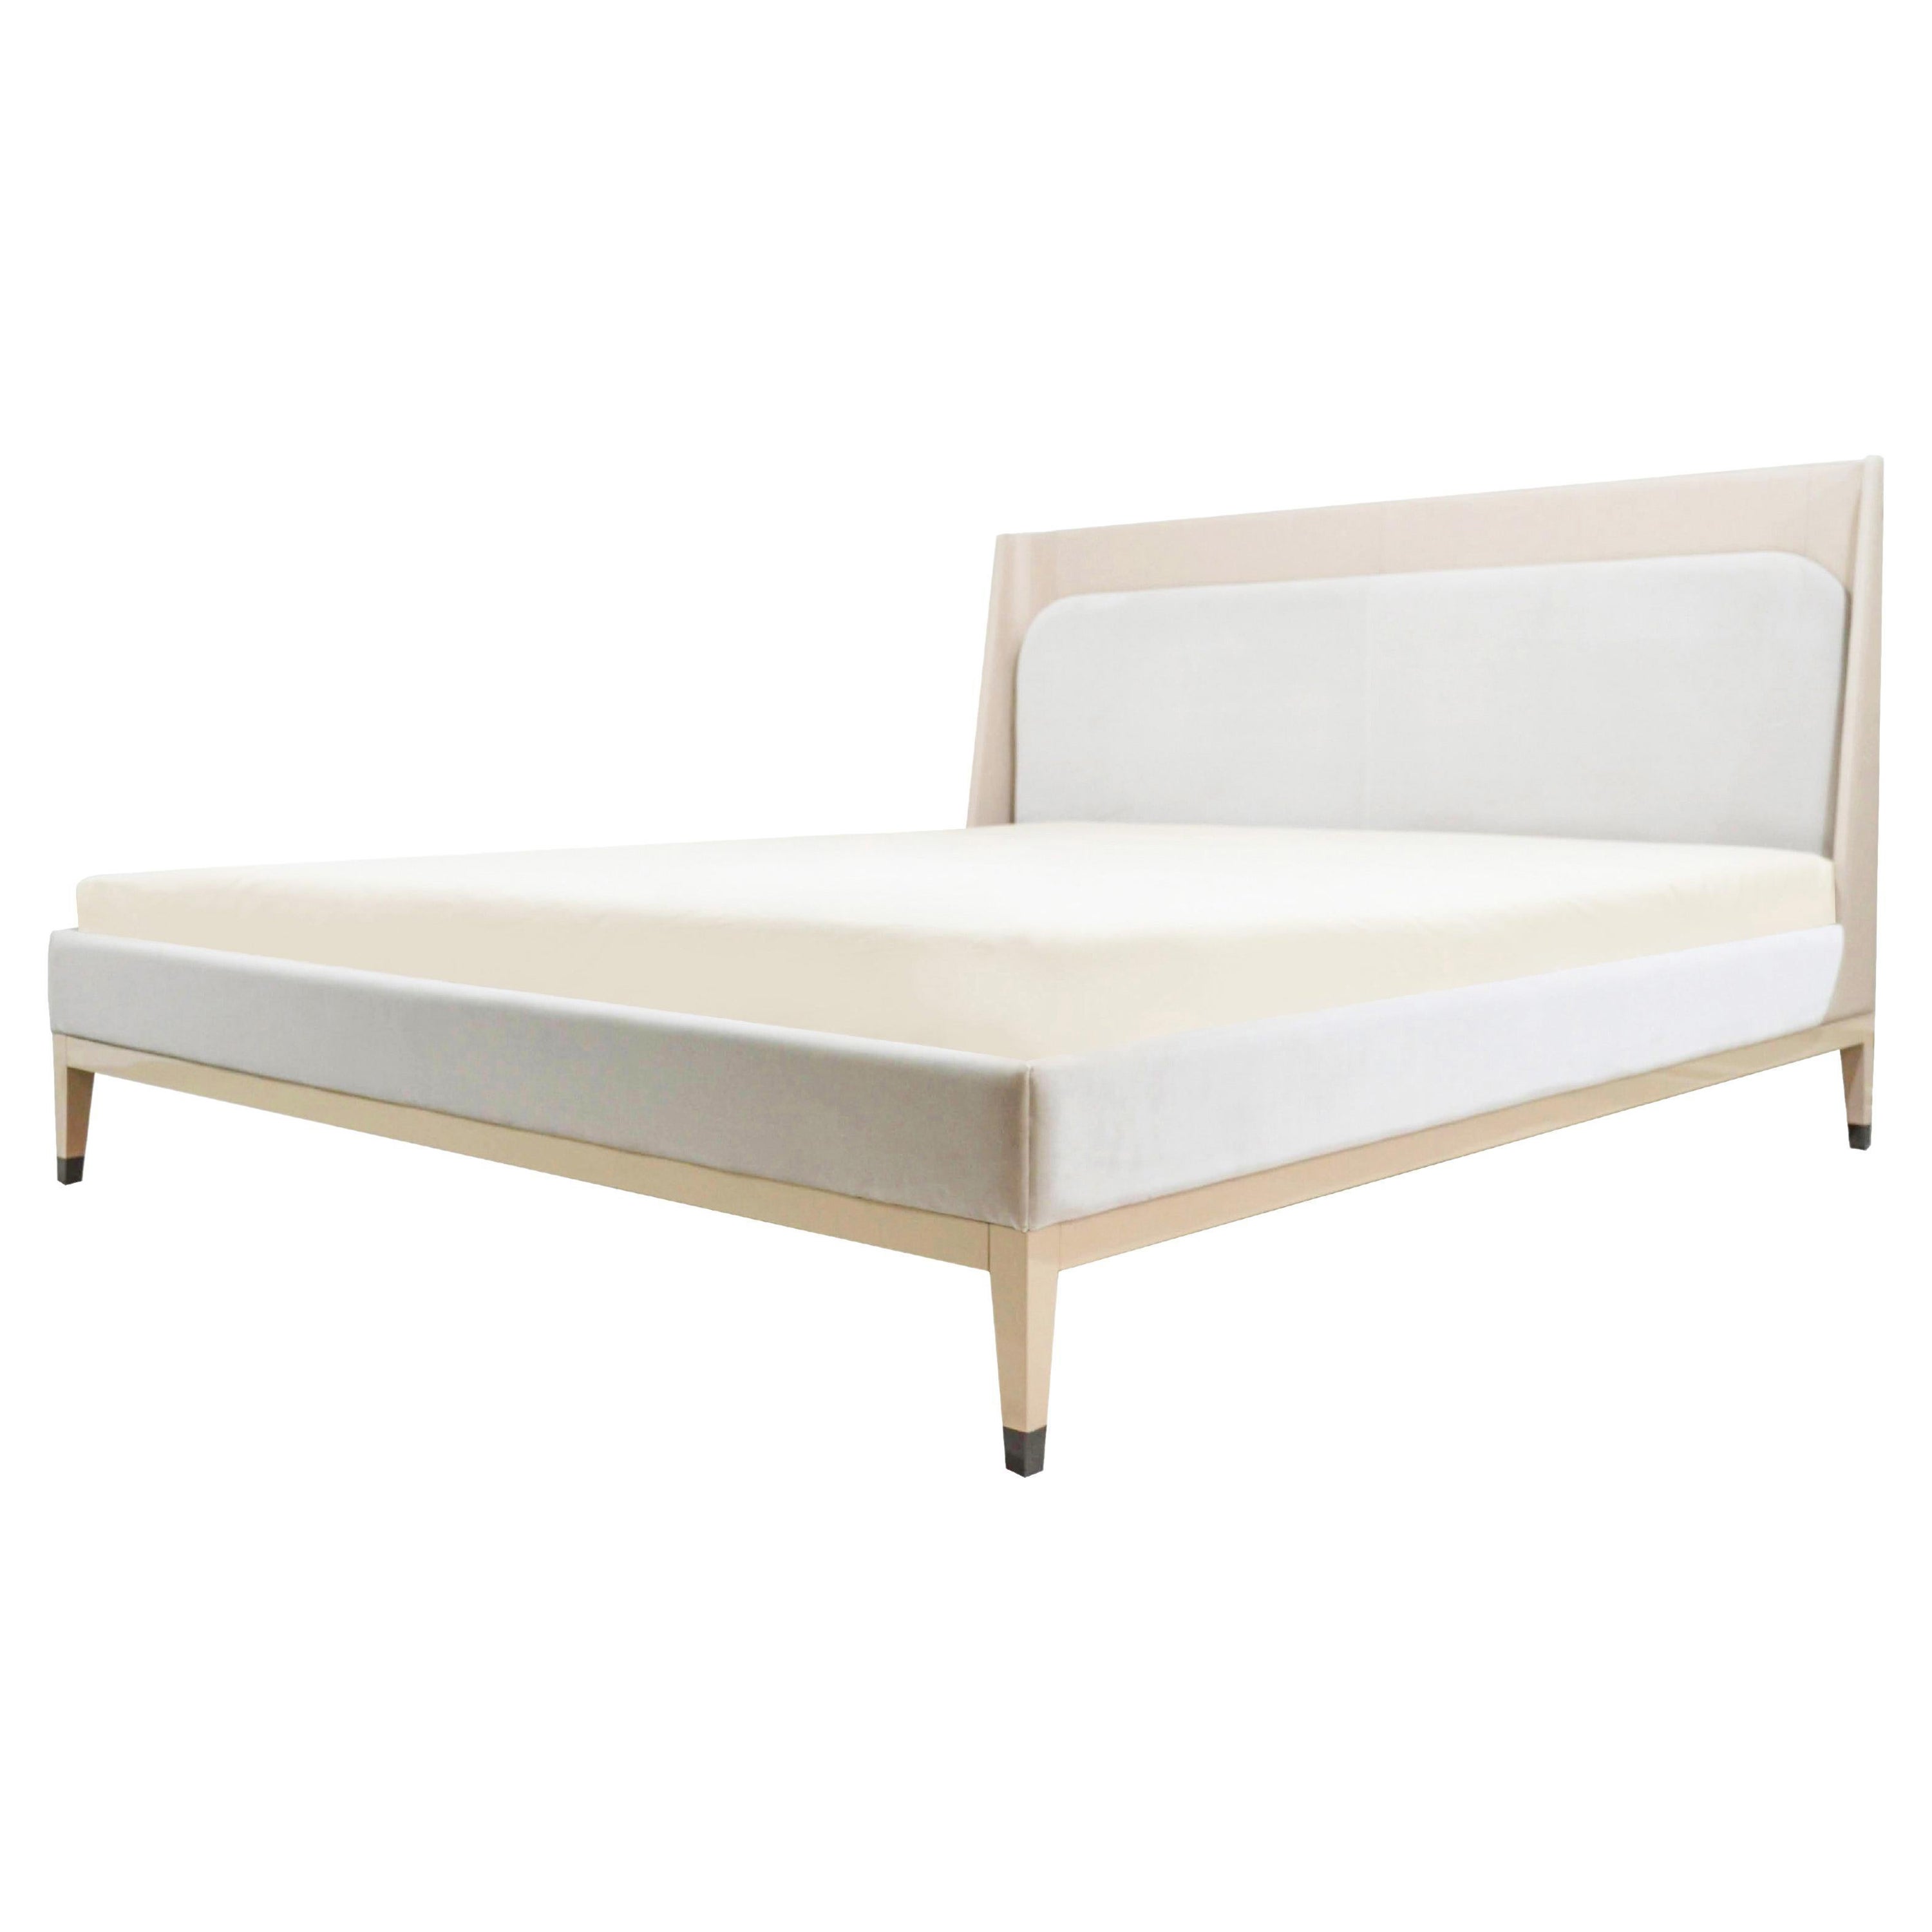 Super King Size Italian Bed Upholstered Nubuck and Velvet with Wooden Legs For Sale